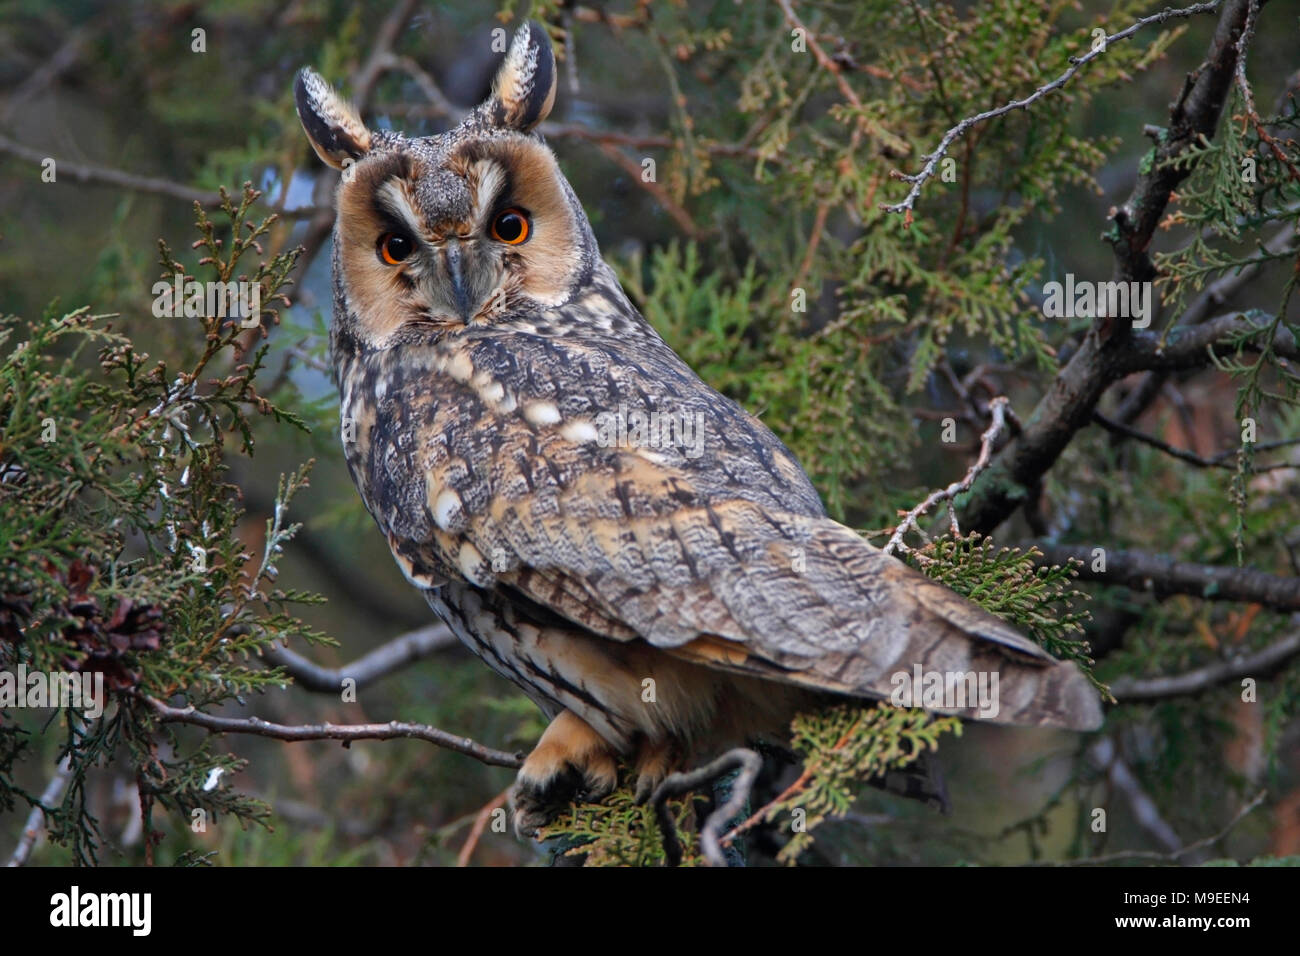 LONG-eared Owl (Asio otus) Banque D'Images